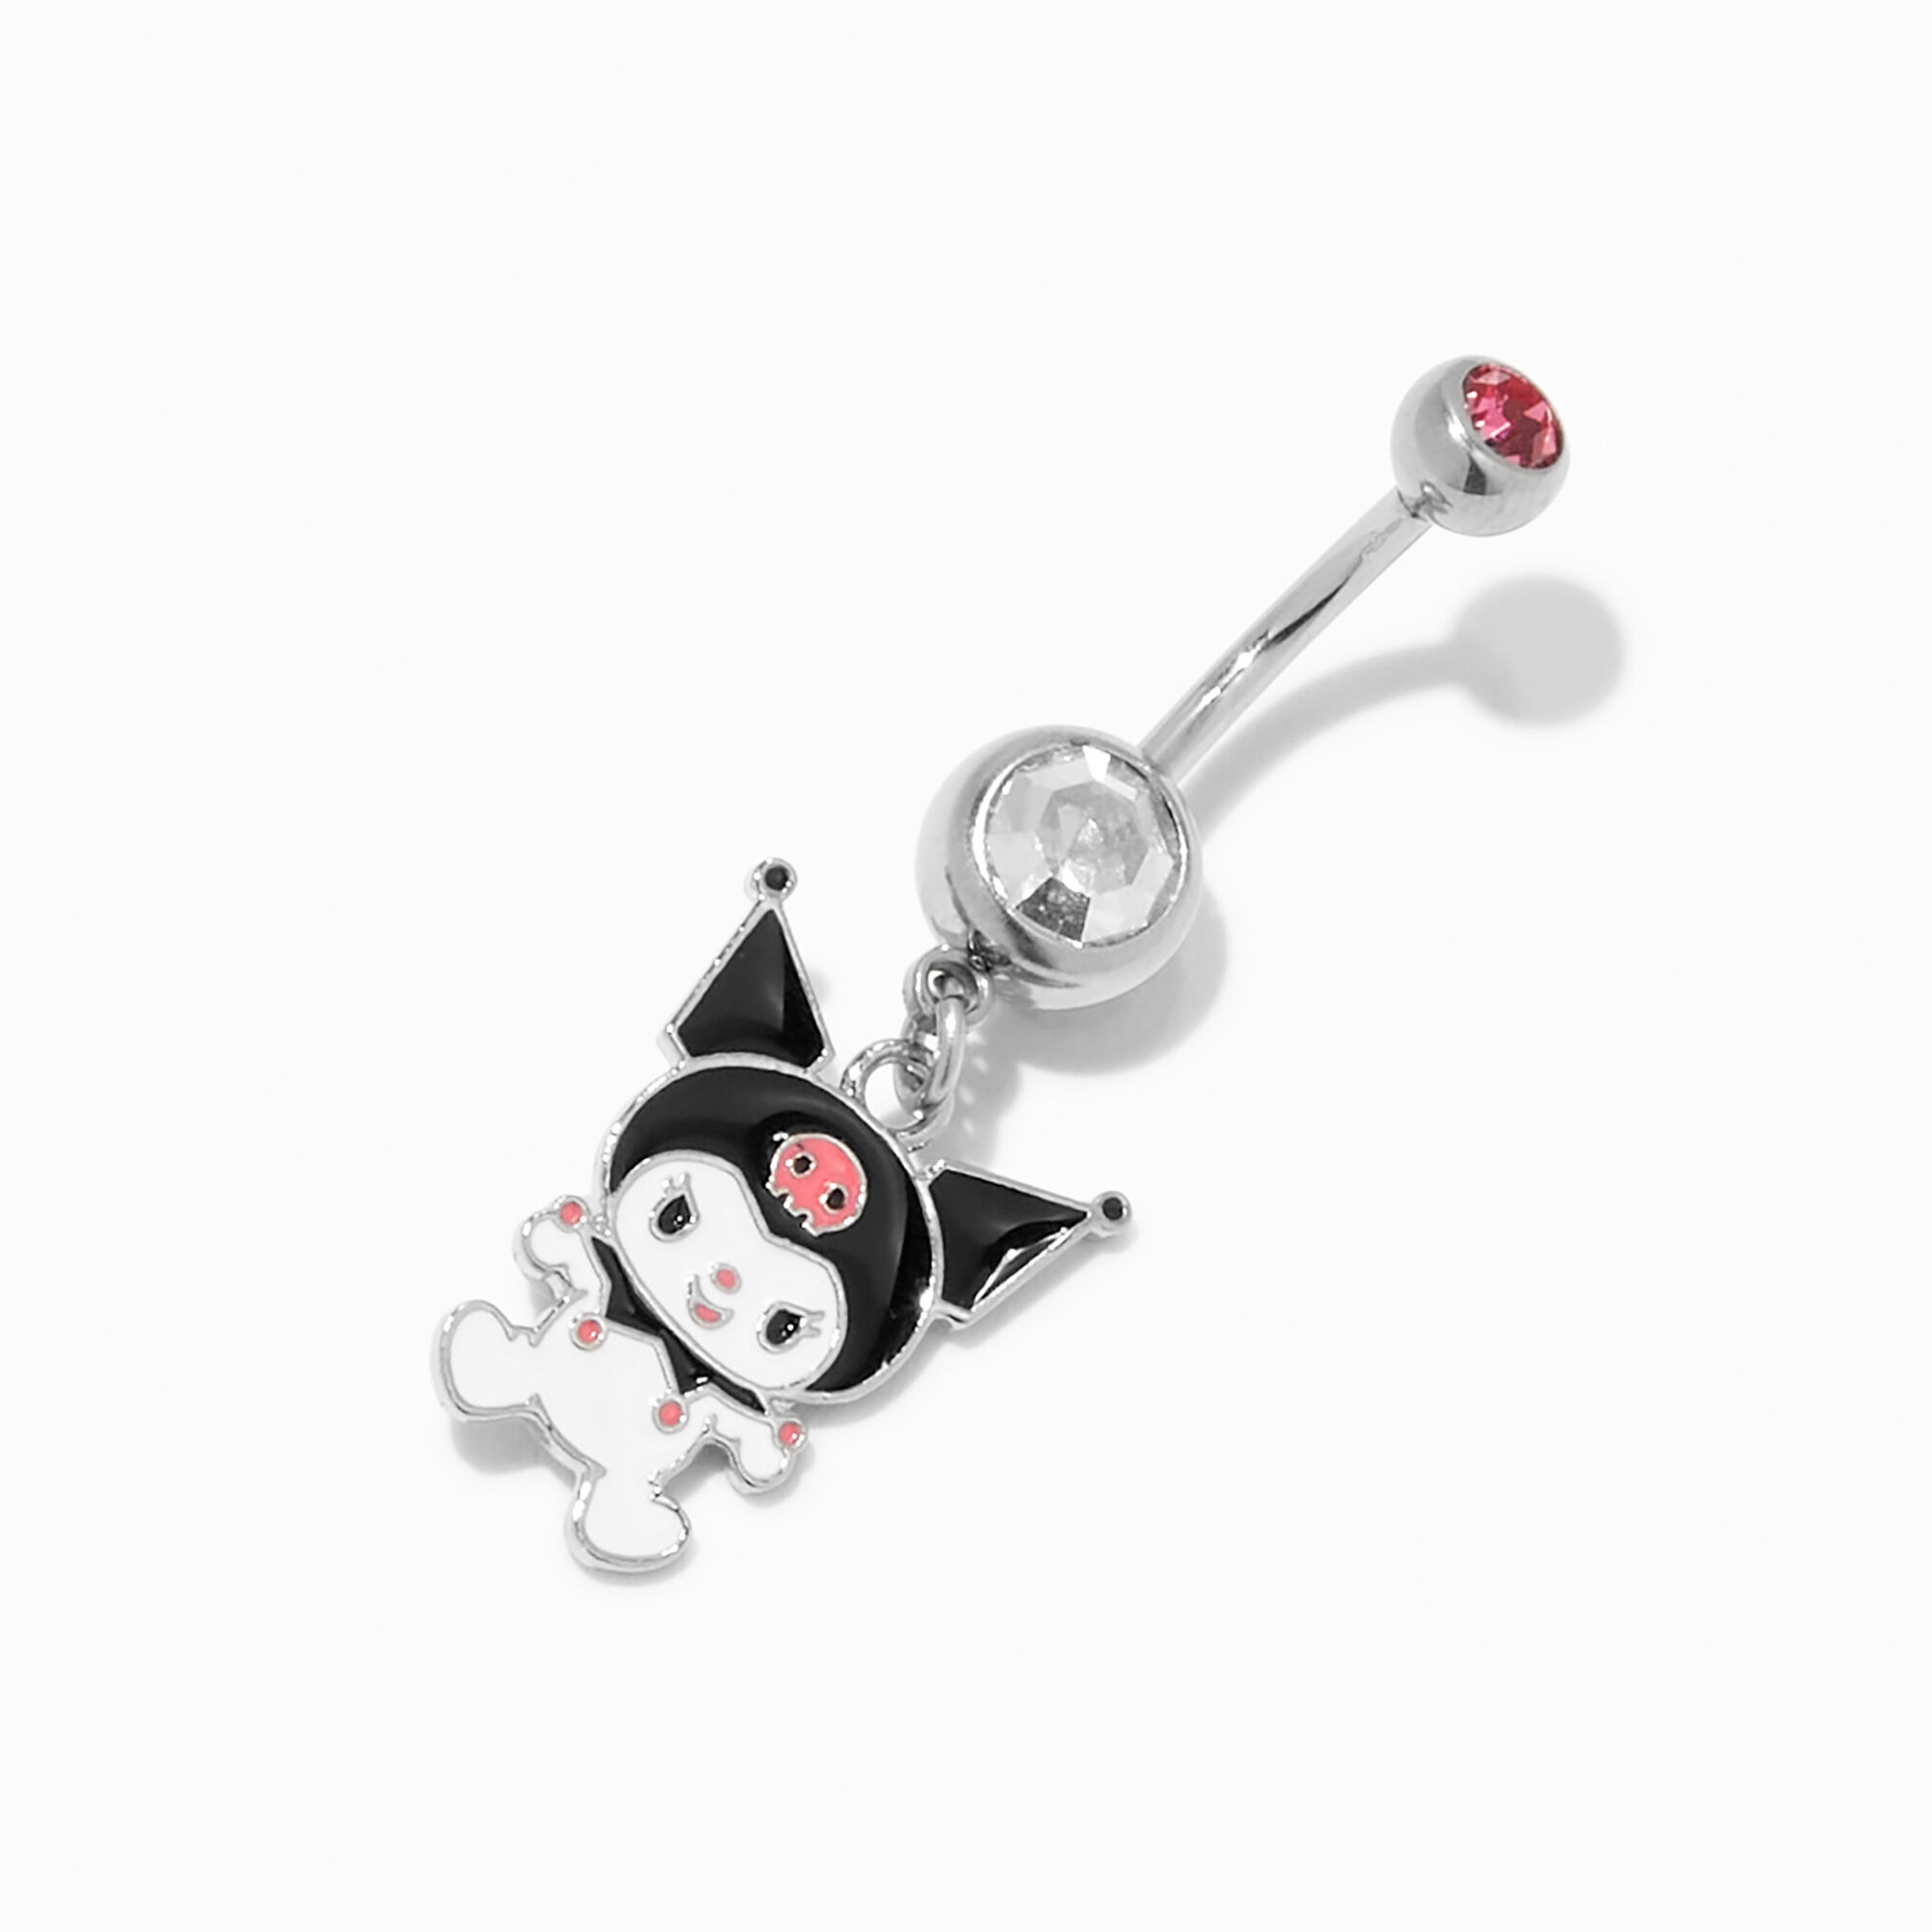 View Claires Kuromi Stainless Steel 14G Charm Belly Ring Pink information